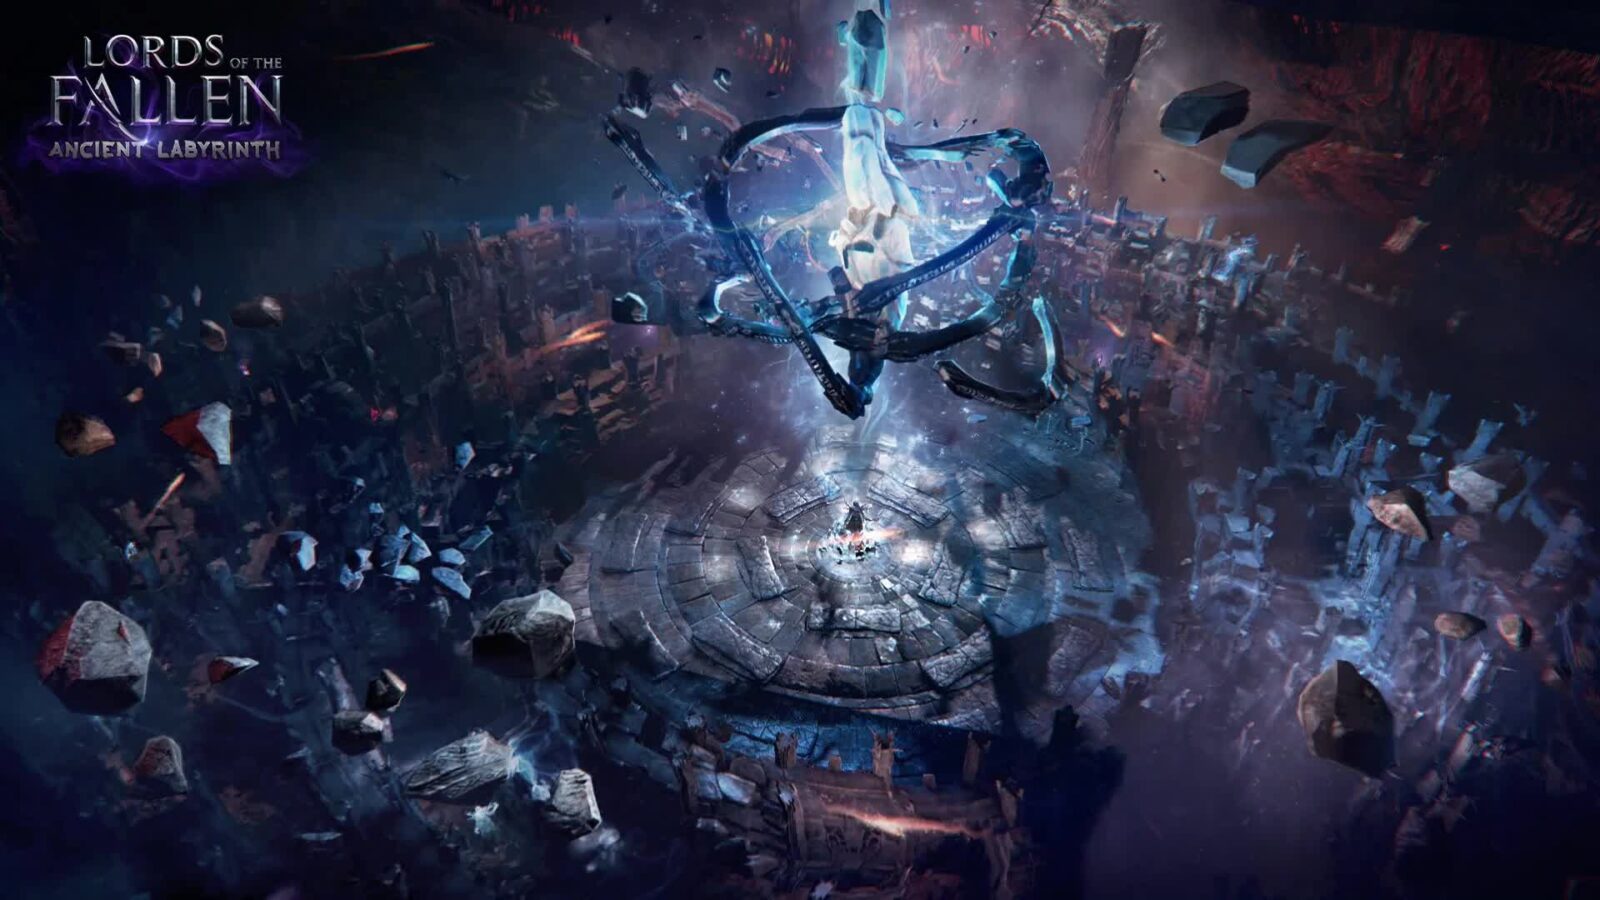 Ancient Labyrinth Lords Of The Fallen - Free Live Wallpaper